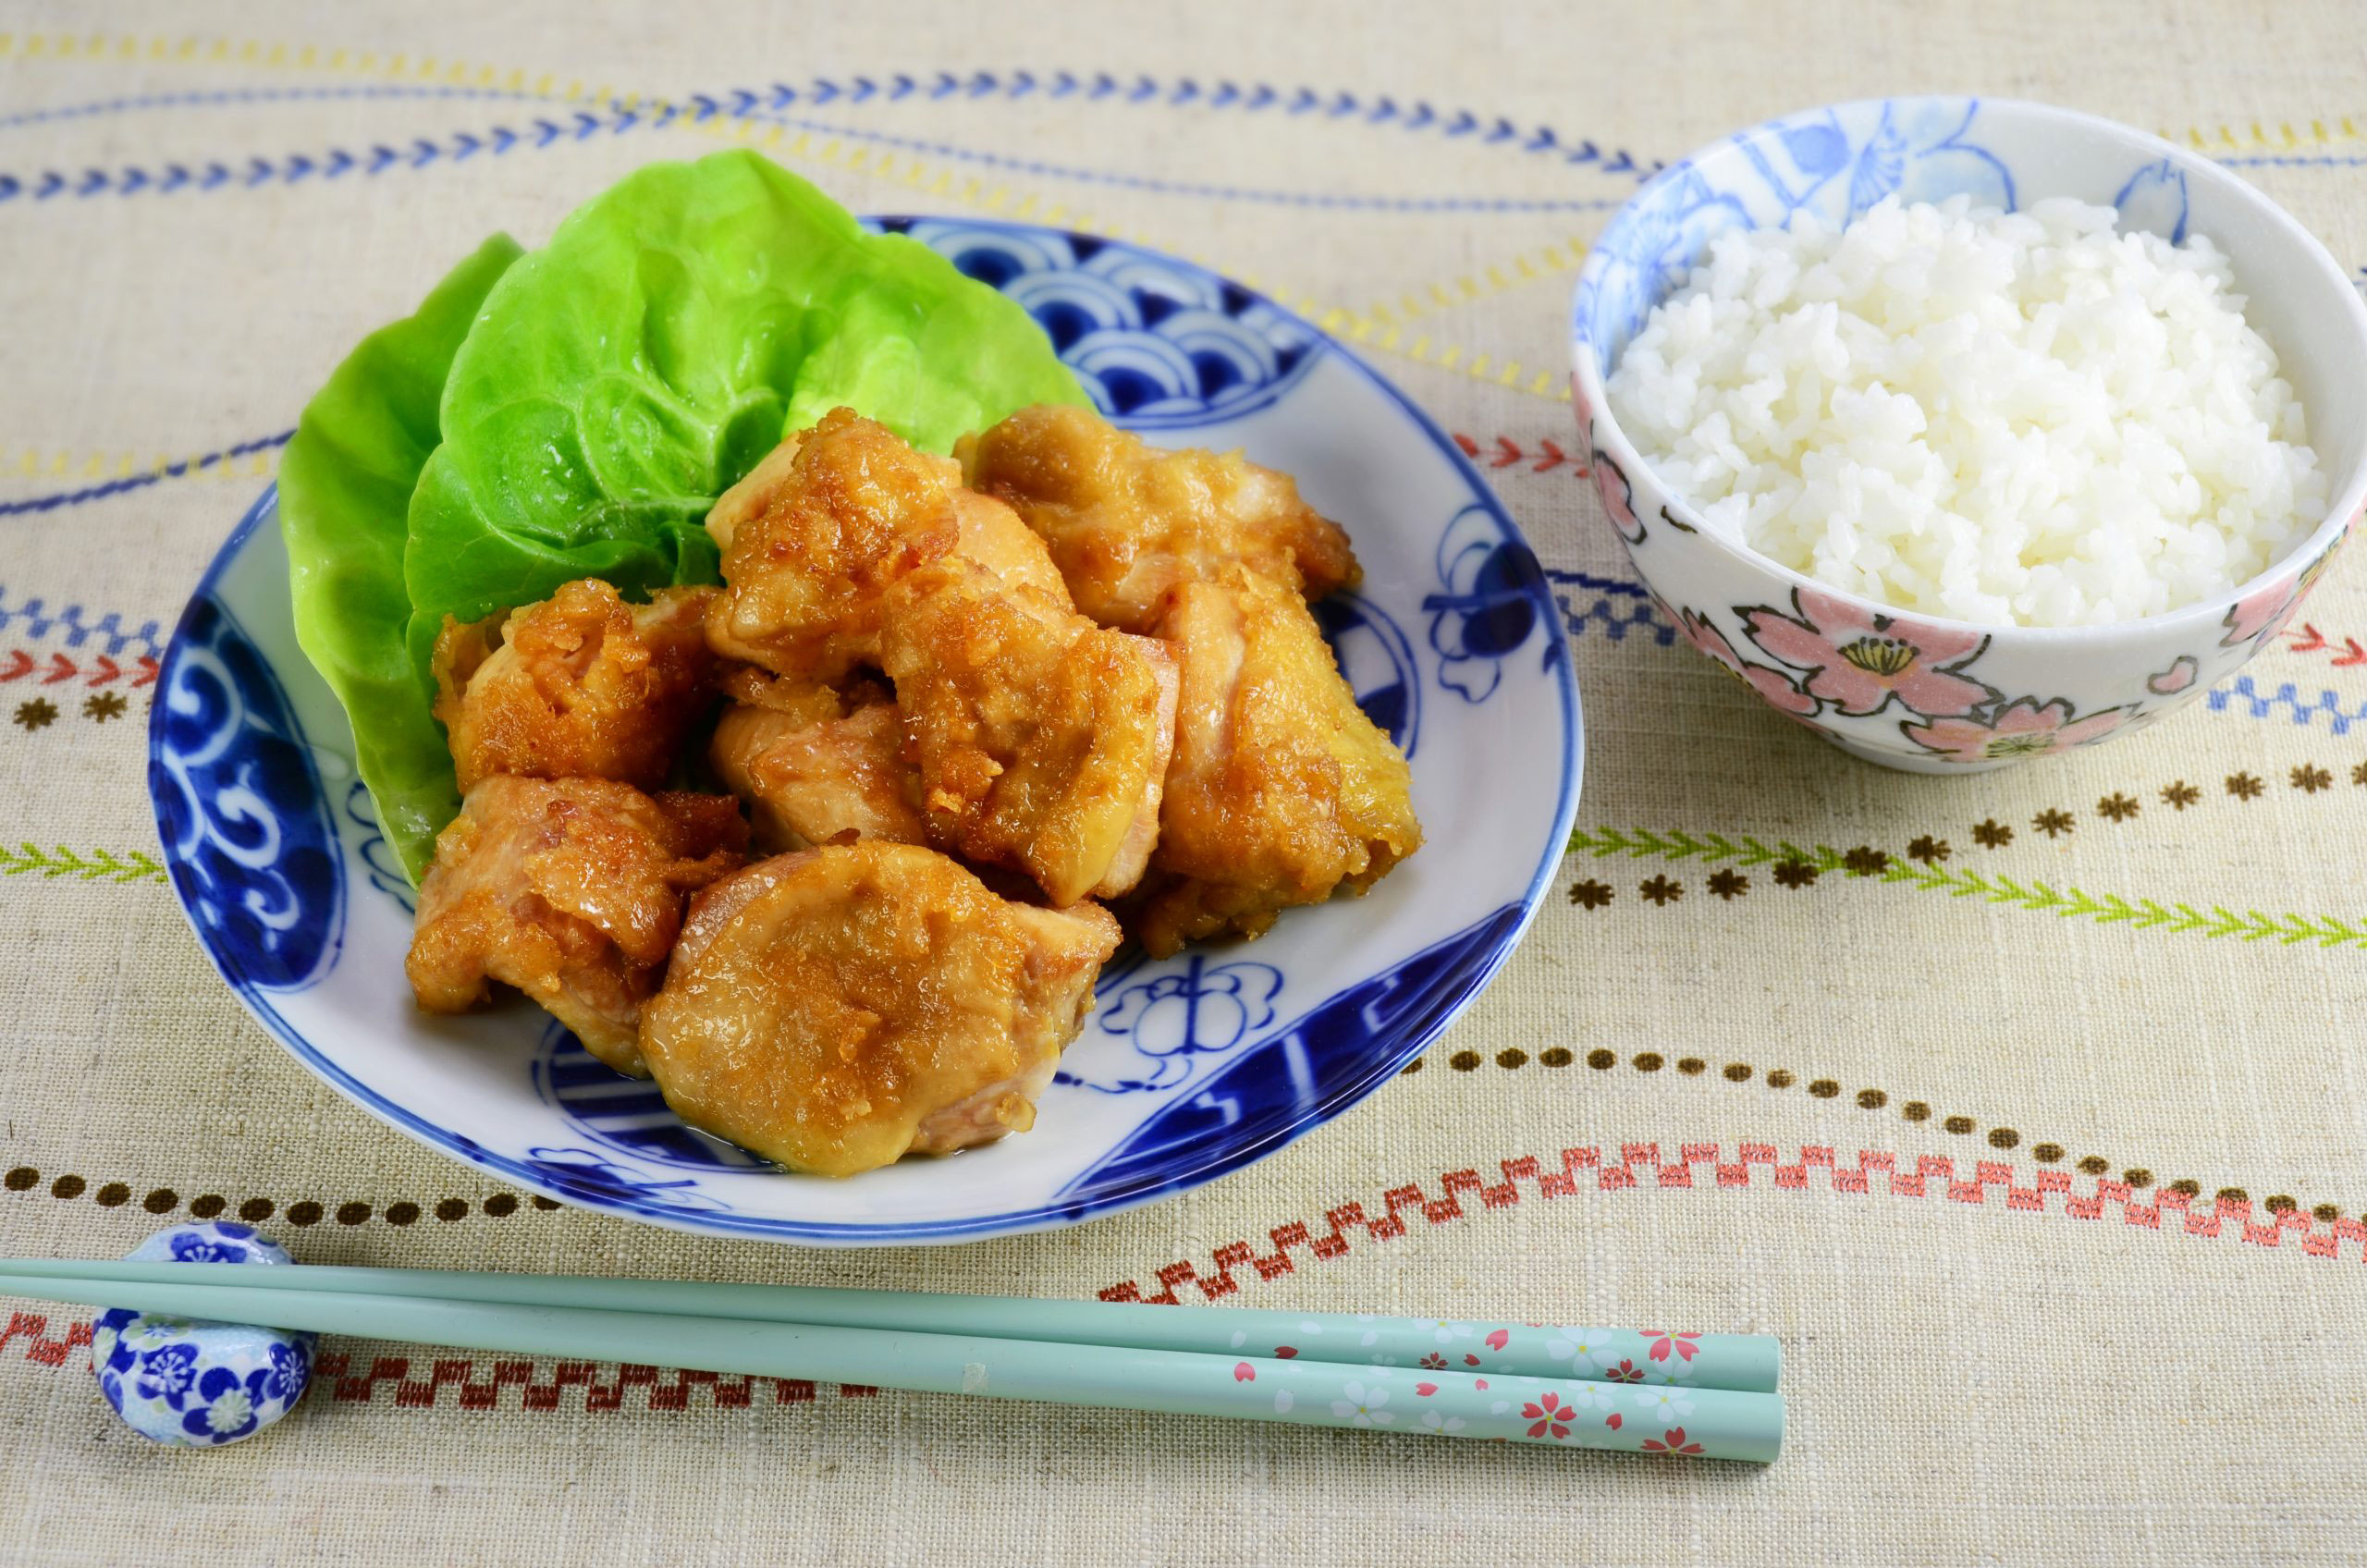 Plate with golden and crispy fried chicken karaage served with a bowl of white rice